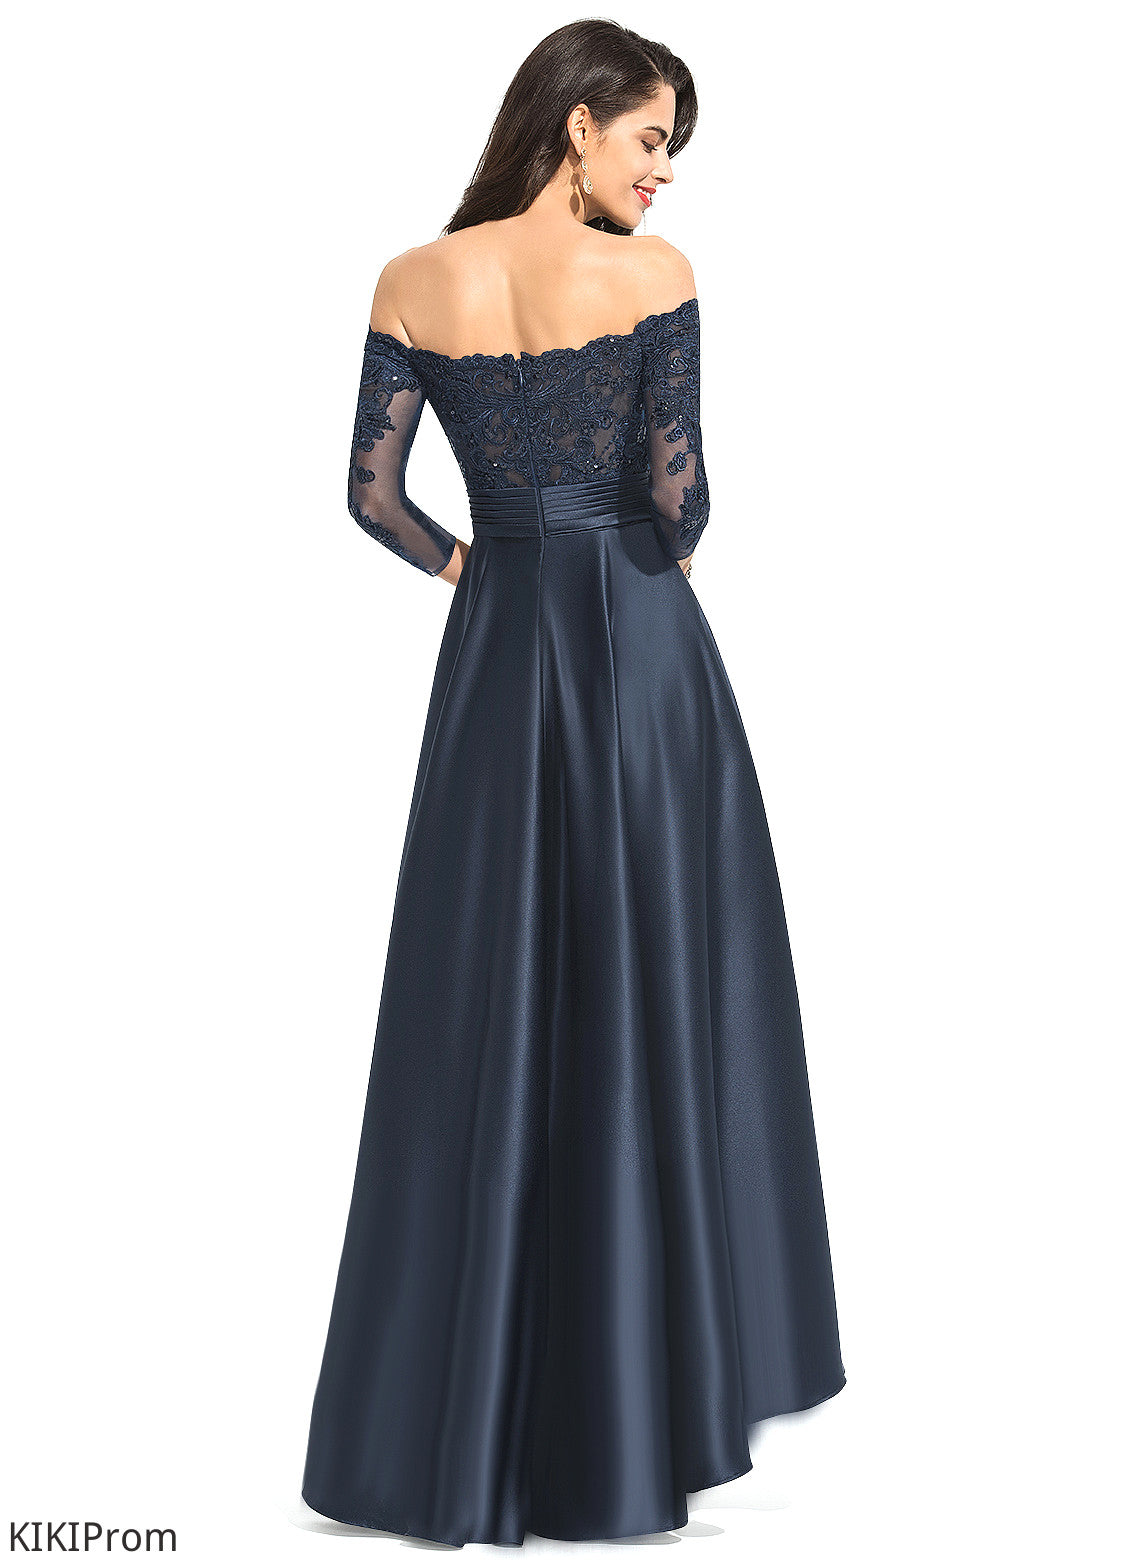 With Cascading Asymmetrical A-Line Off-the-Shoulder Ruffles Poll Satin Prom Dresses Sequins Lace